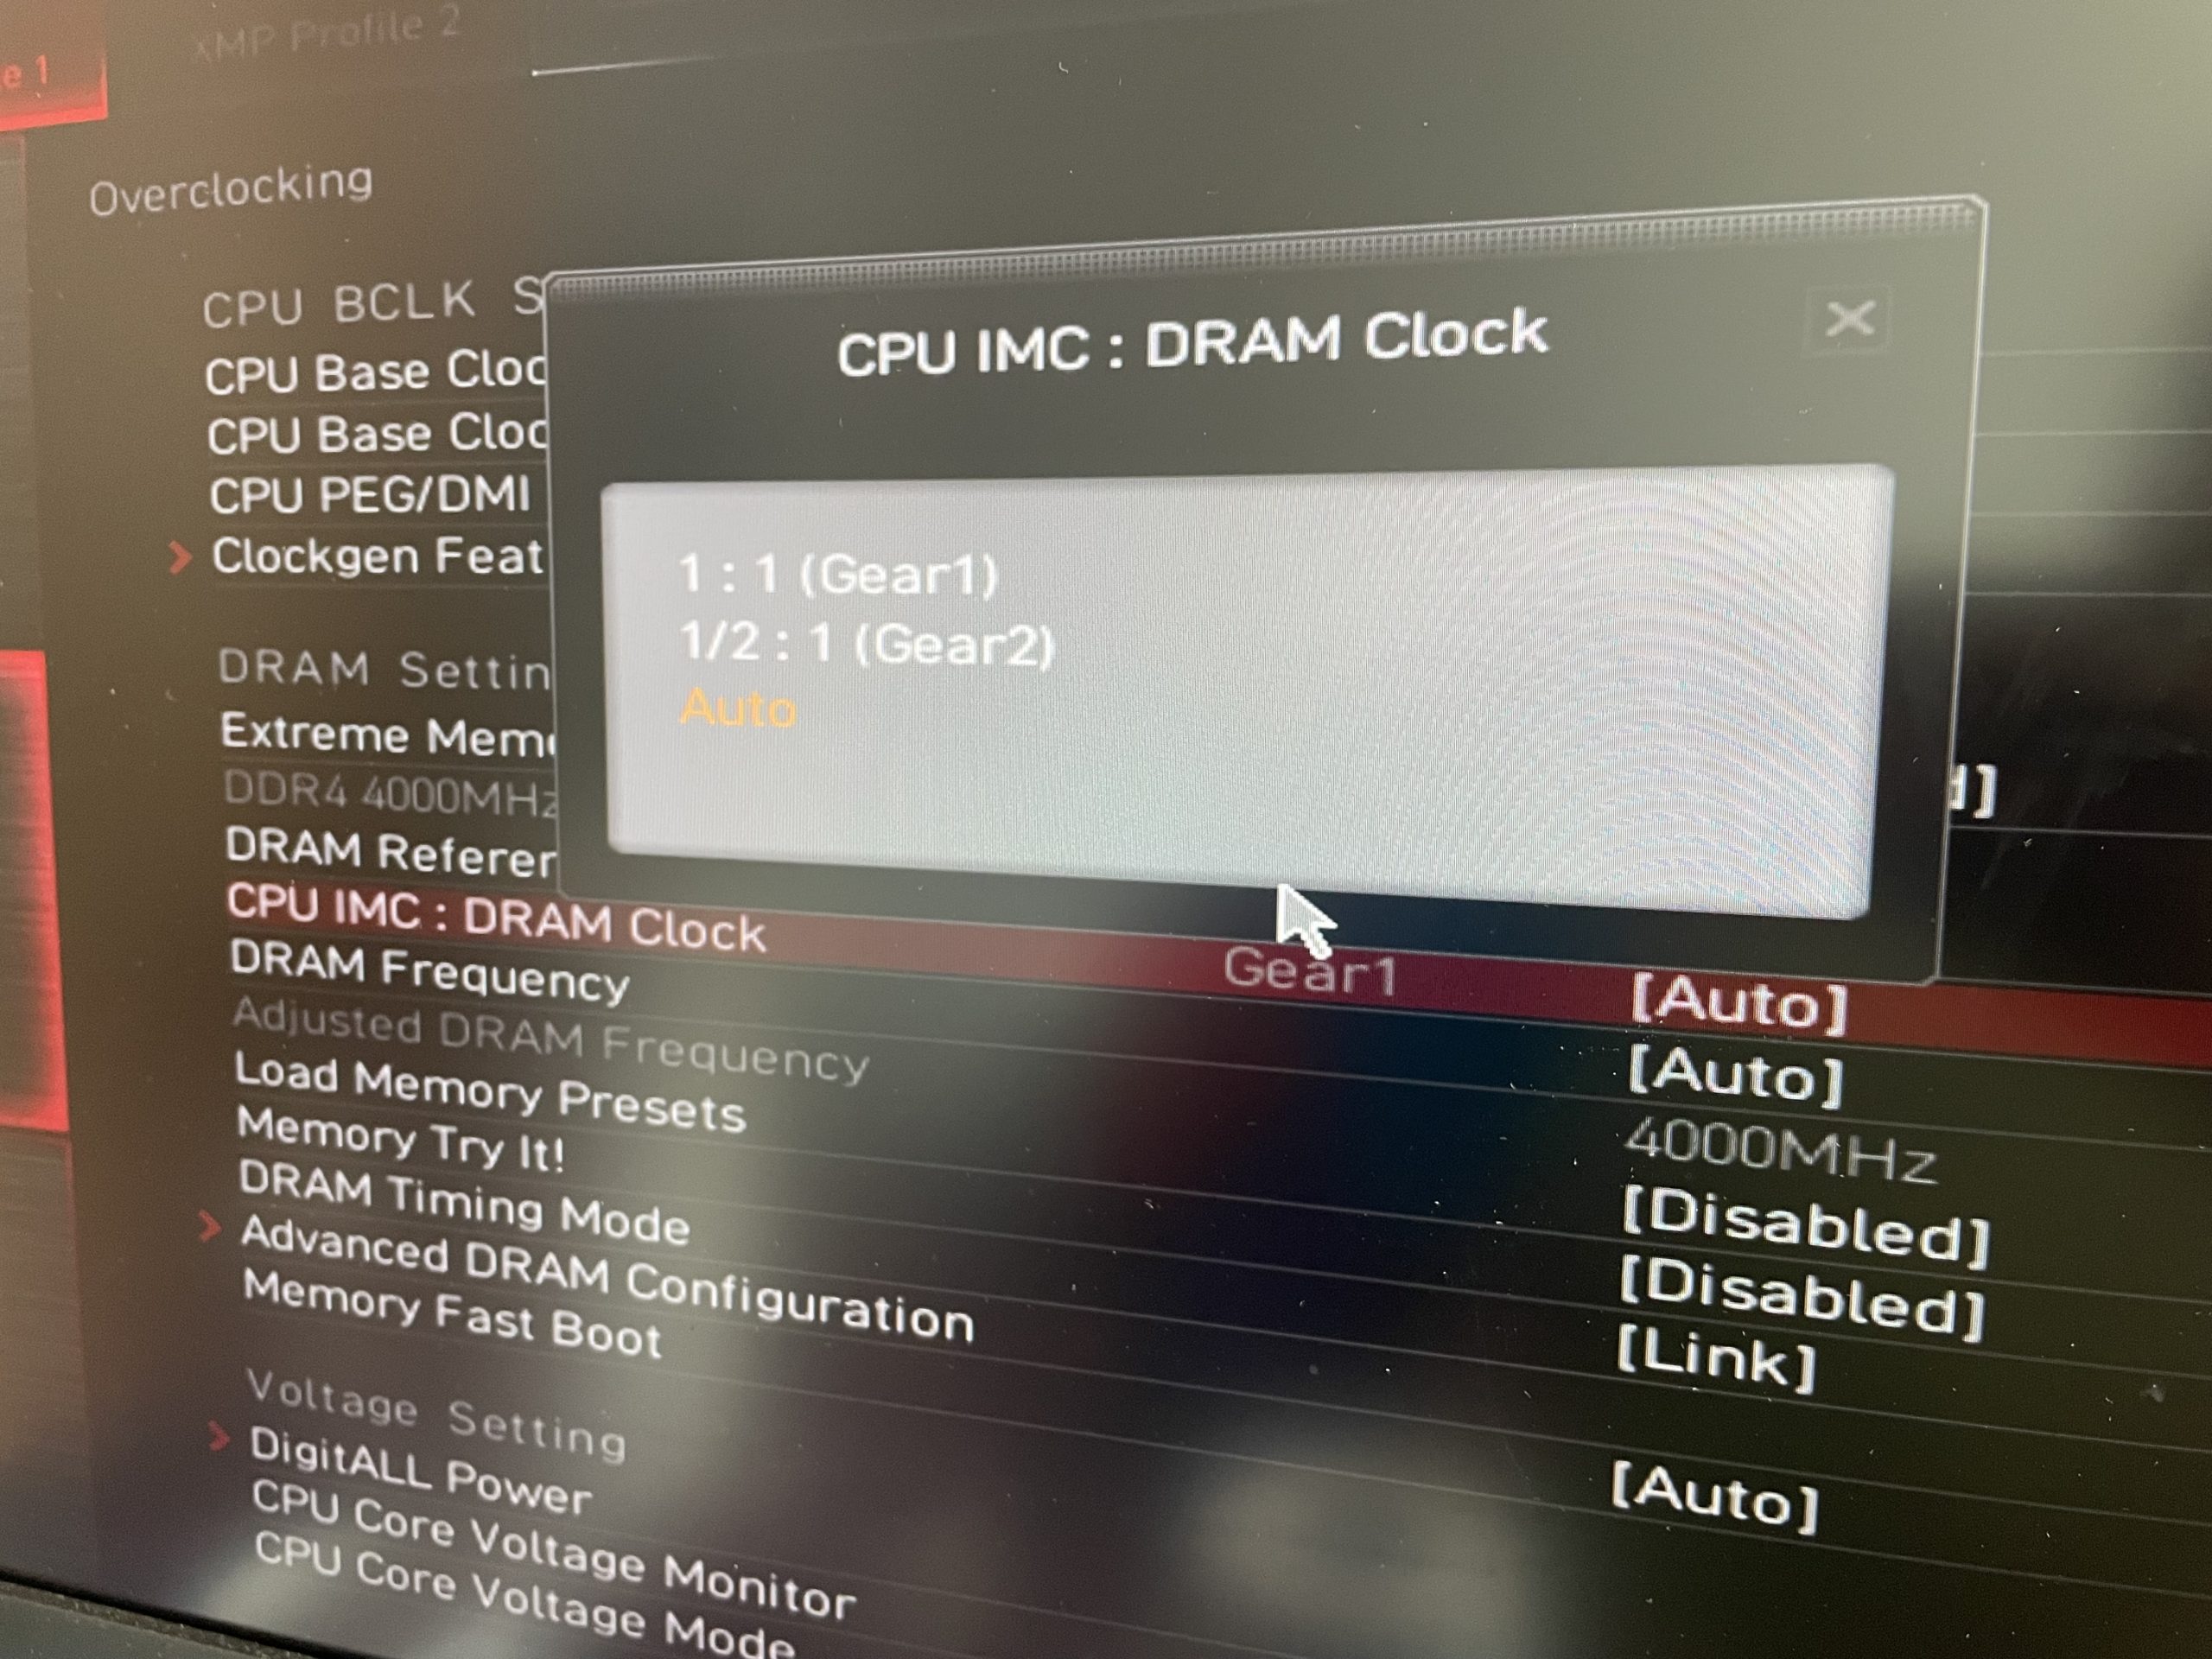 intel-copies-amd’s-memory-overclocking-approach-with-rocket-lake-cpus